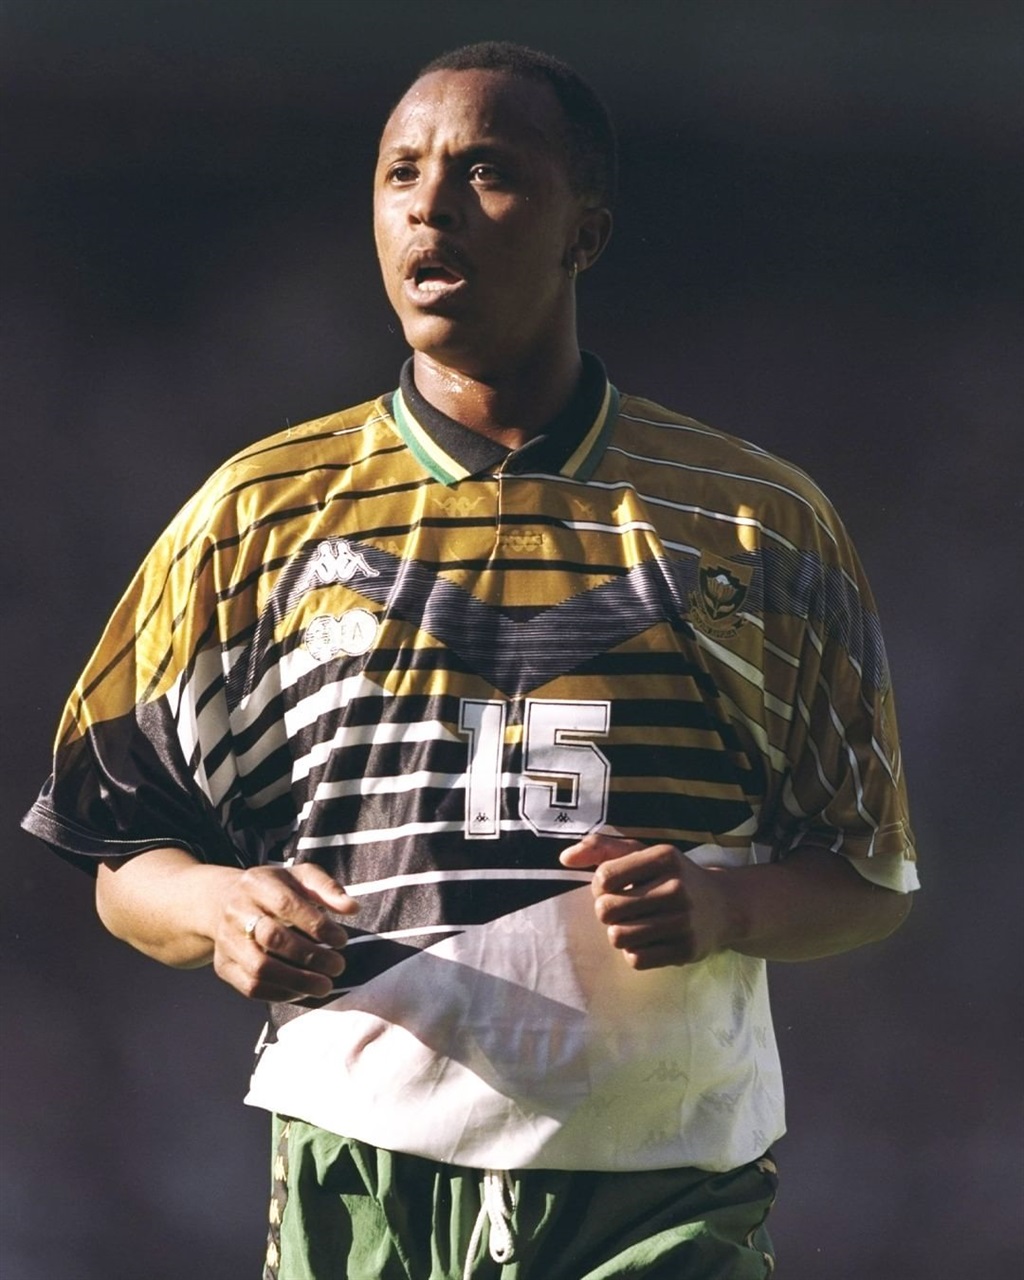 South African football legend Doctor Khumalo.